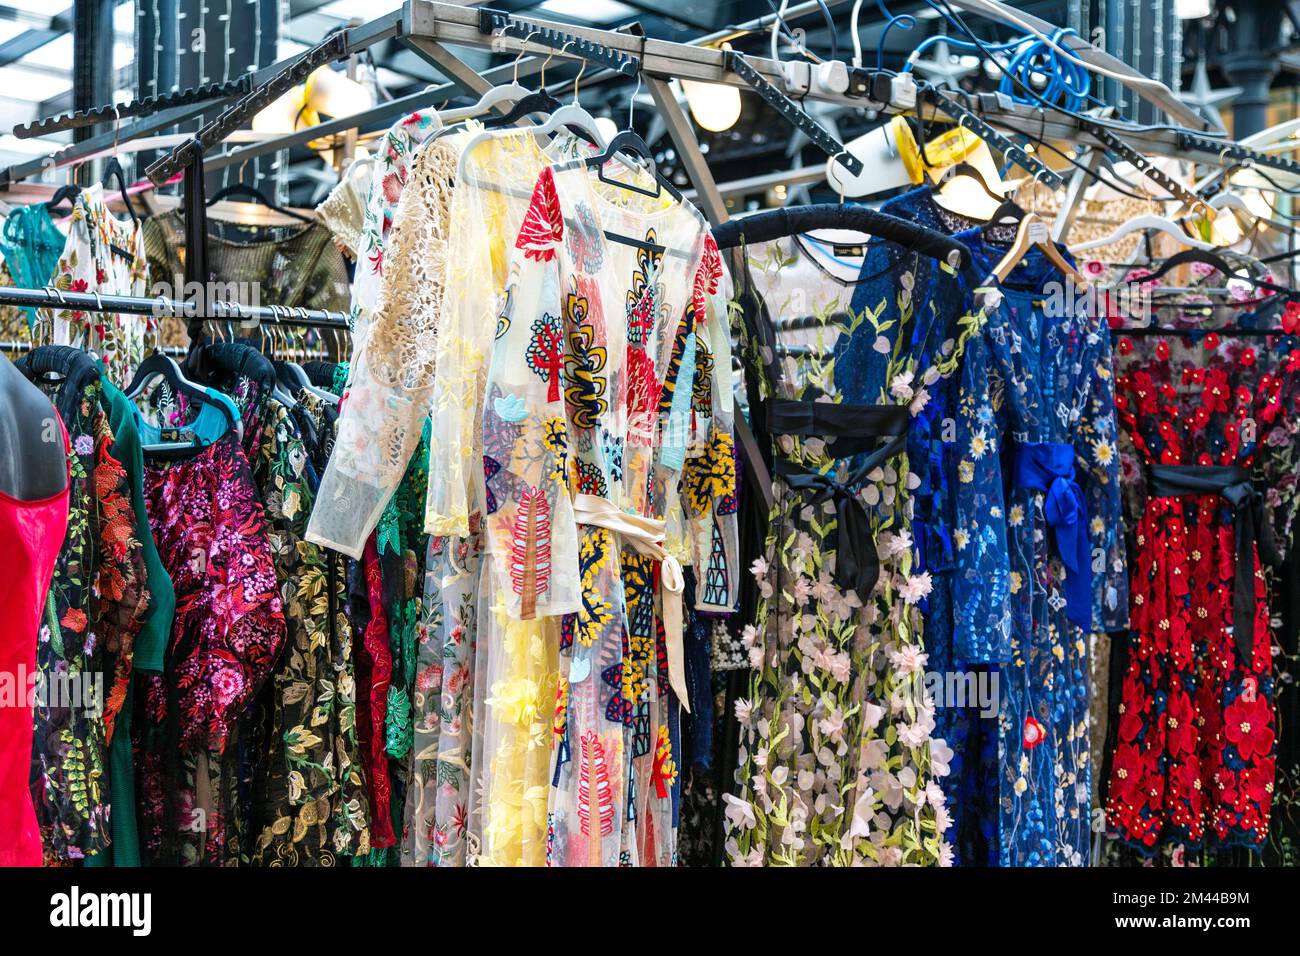 Stall with colourful dresses at Spitalfields Market, London, UK Stock Photo